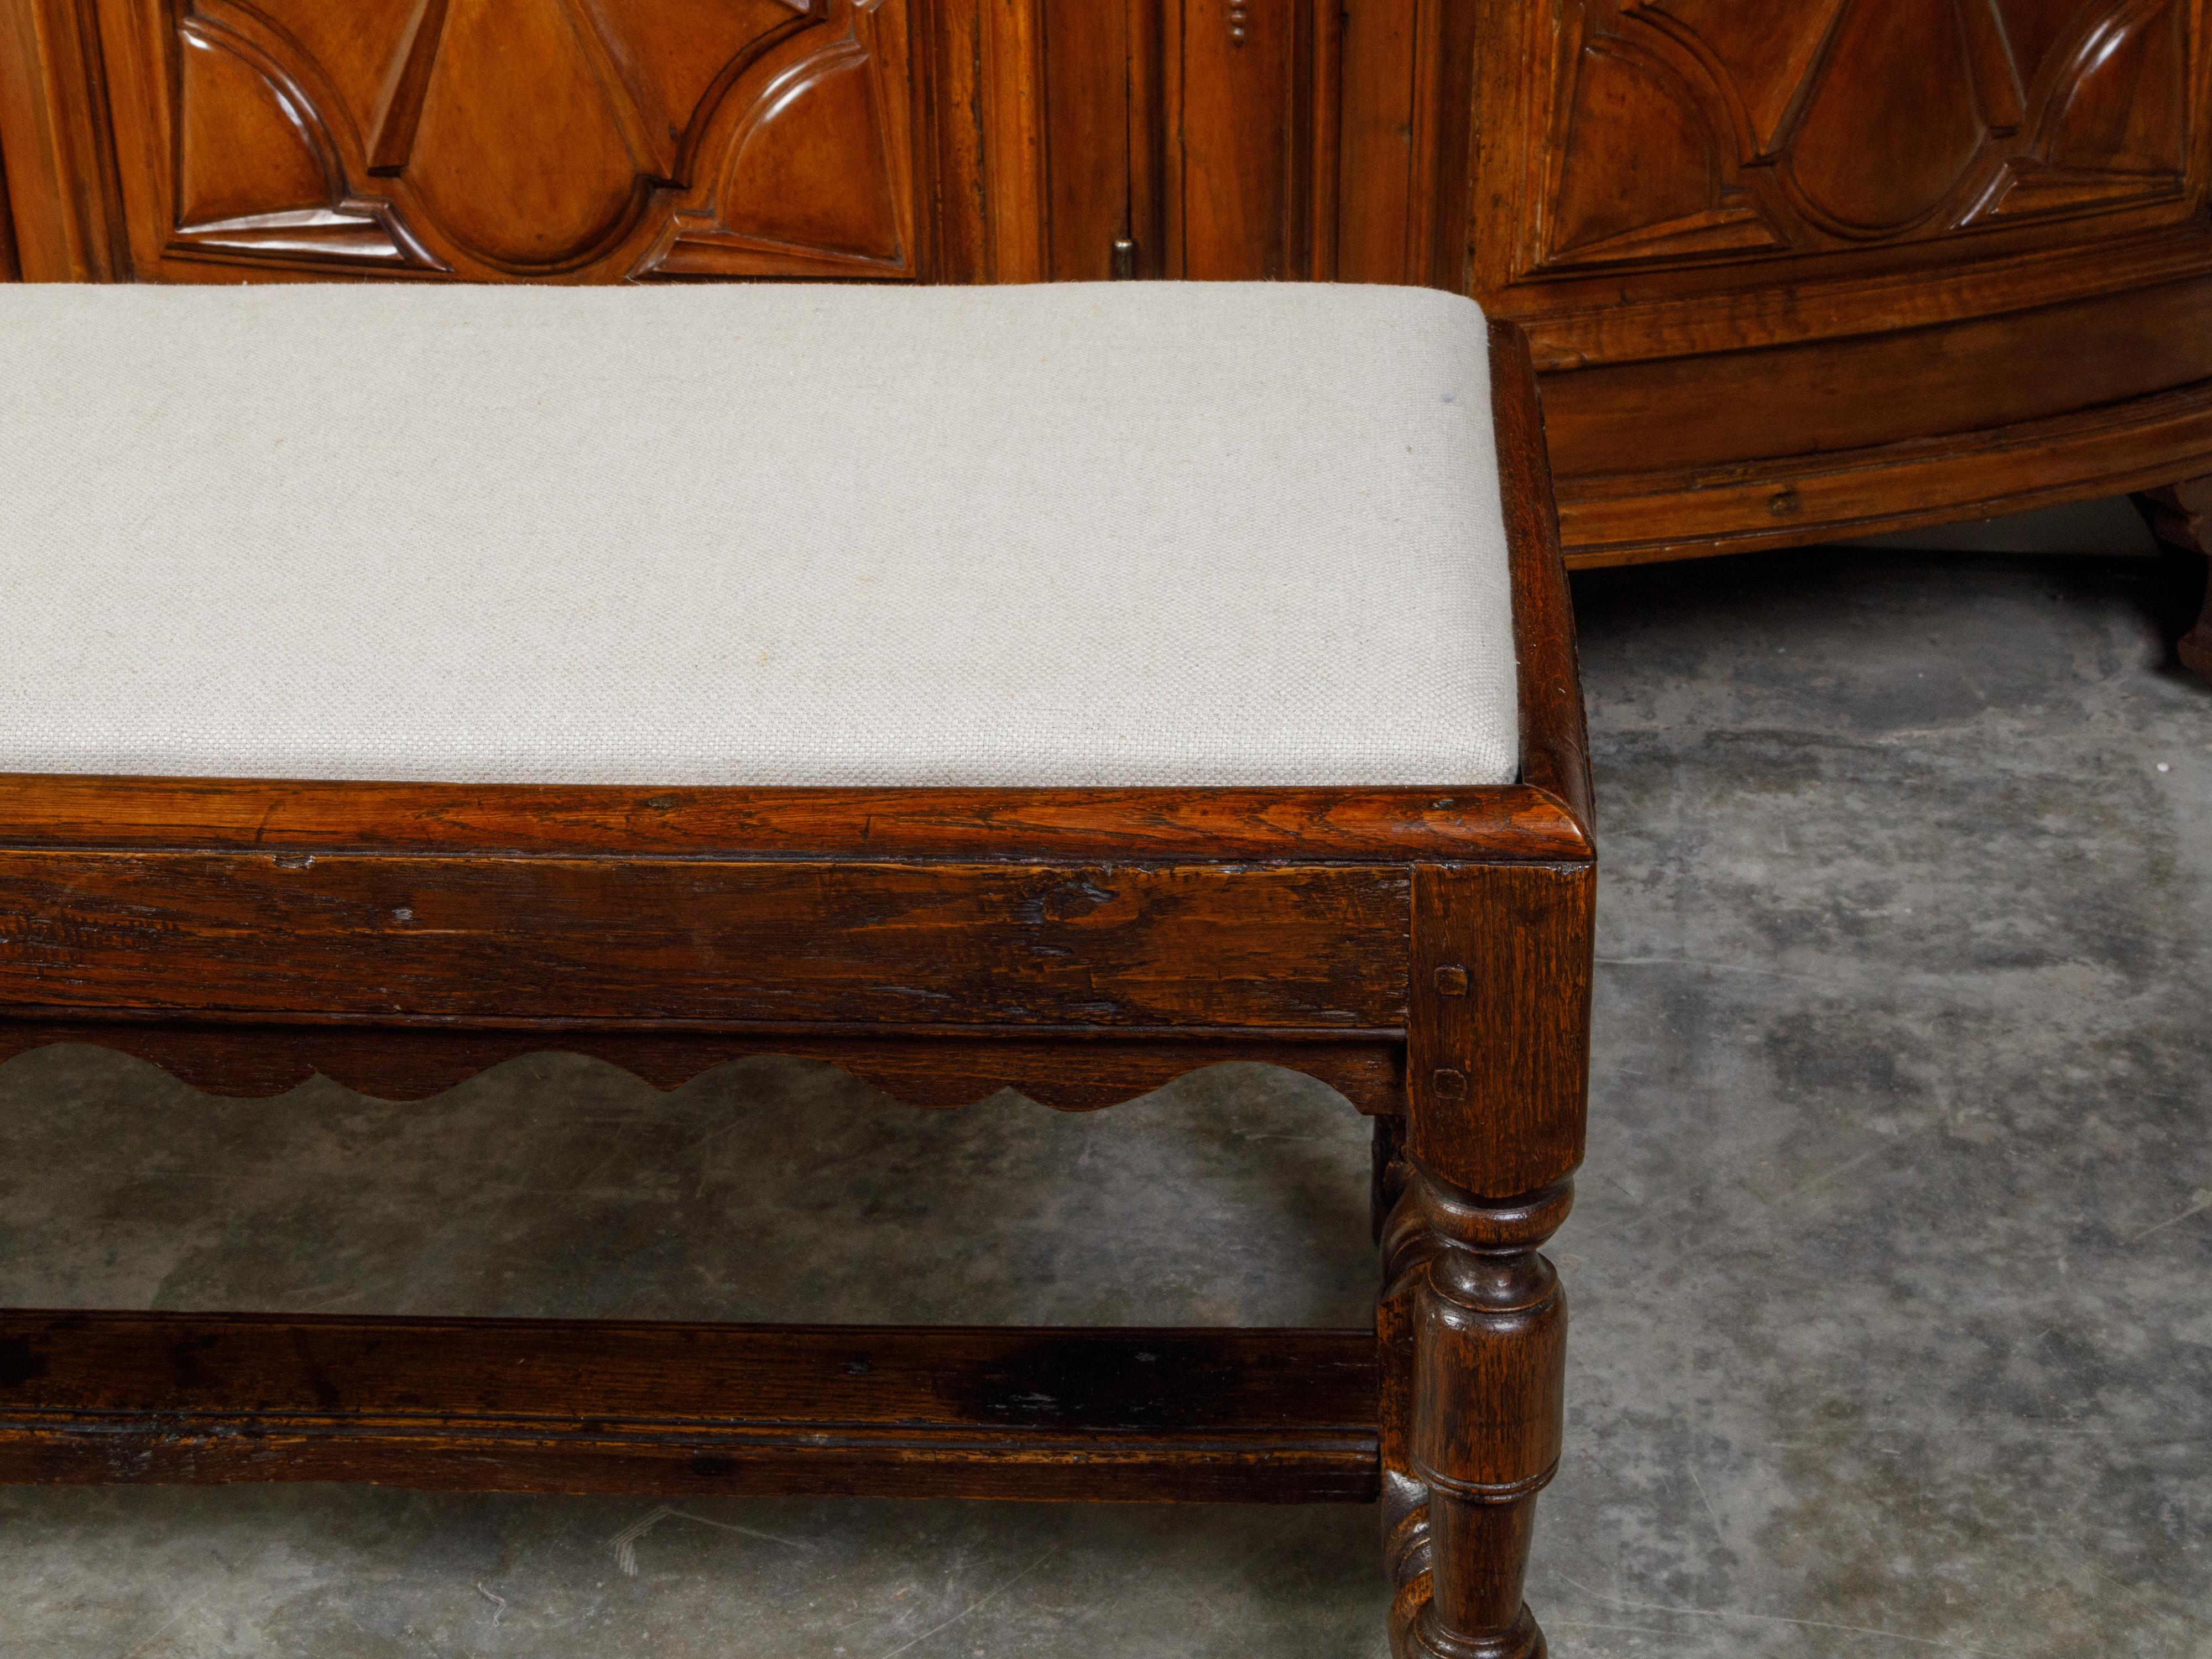 19th Century English 1840s Oak Bench with Turned Legs, H-Form Stretcher and Upholstery